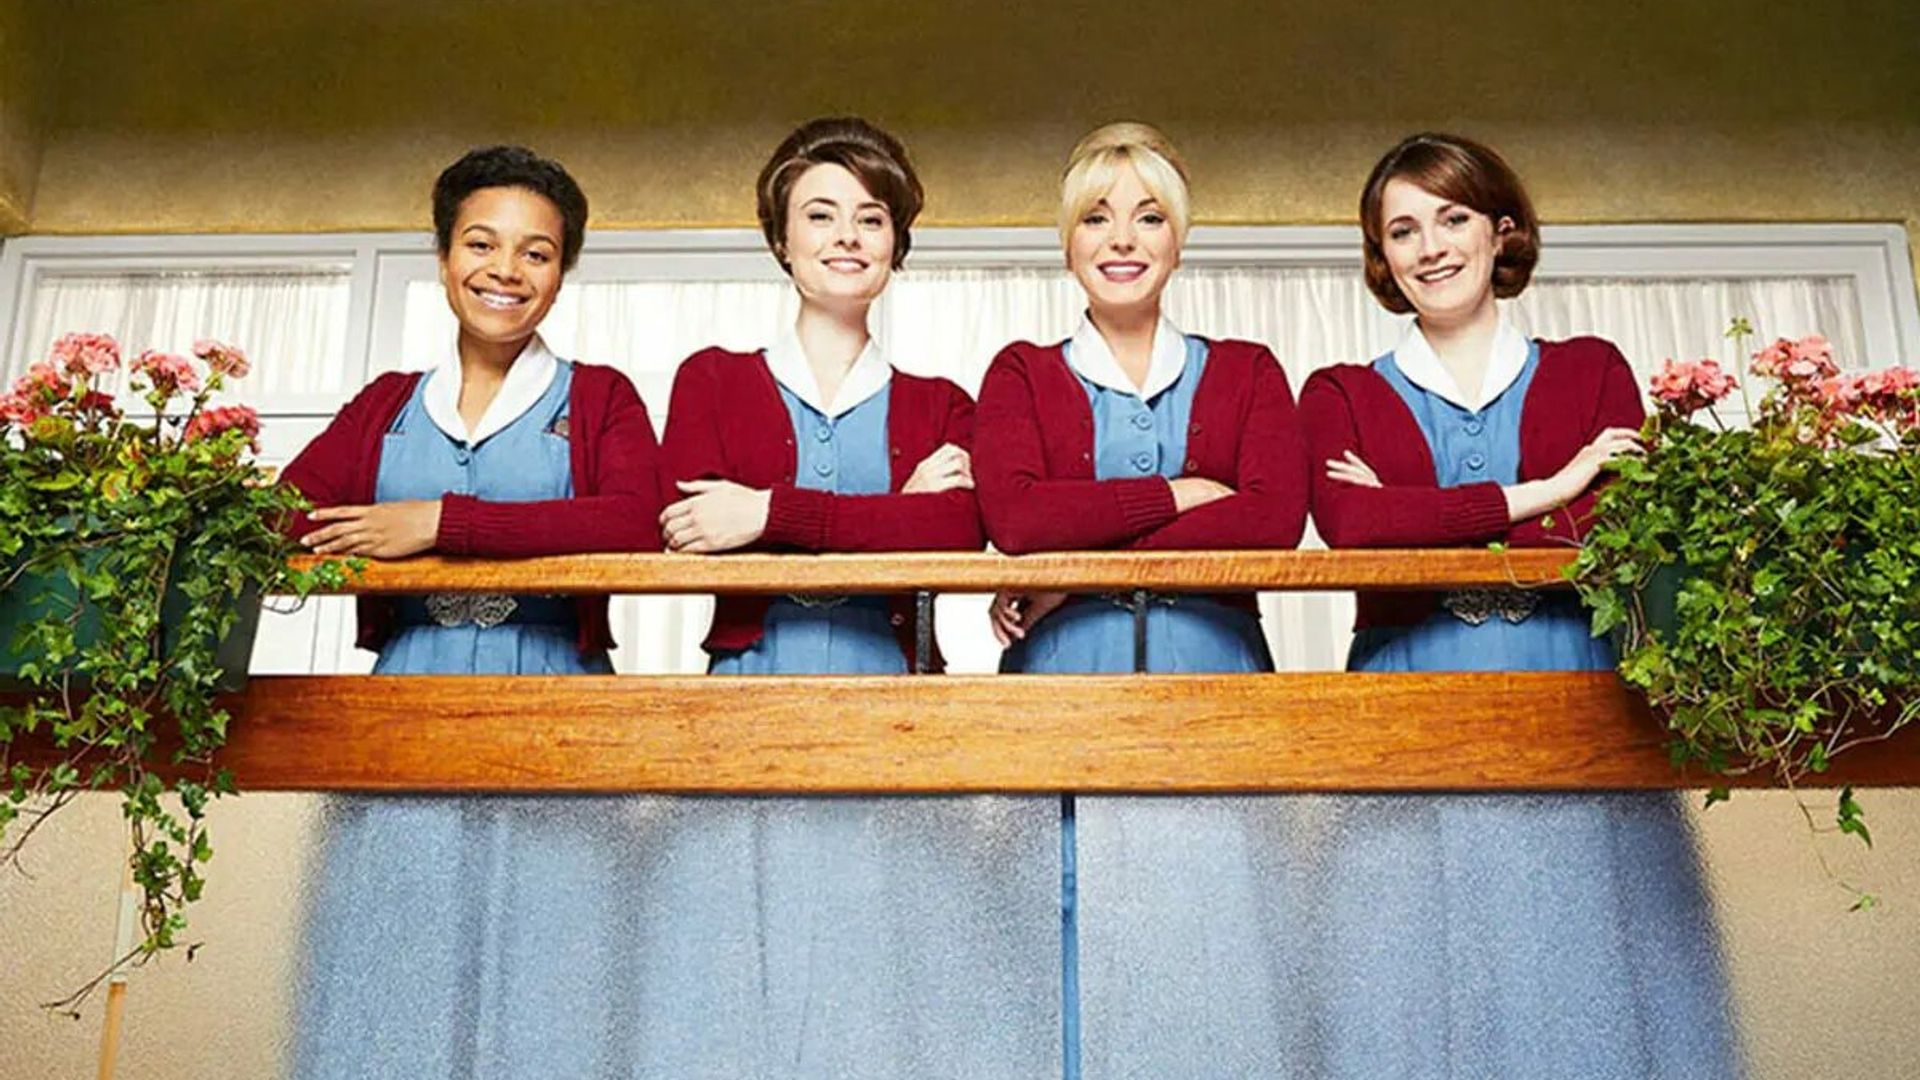 This Call the Midwife star appeared in Death in Paradise – did you spot them?